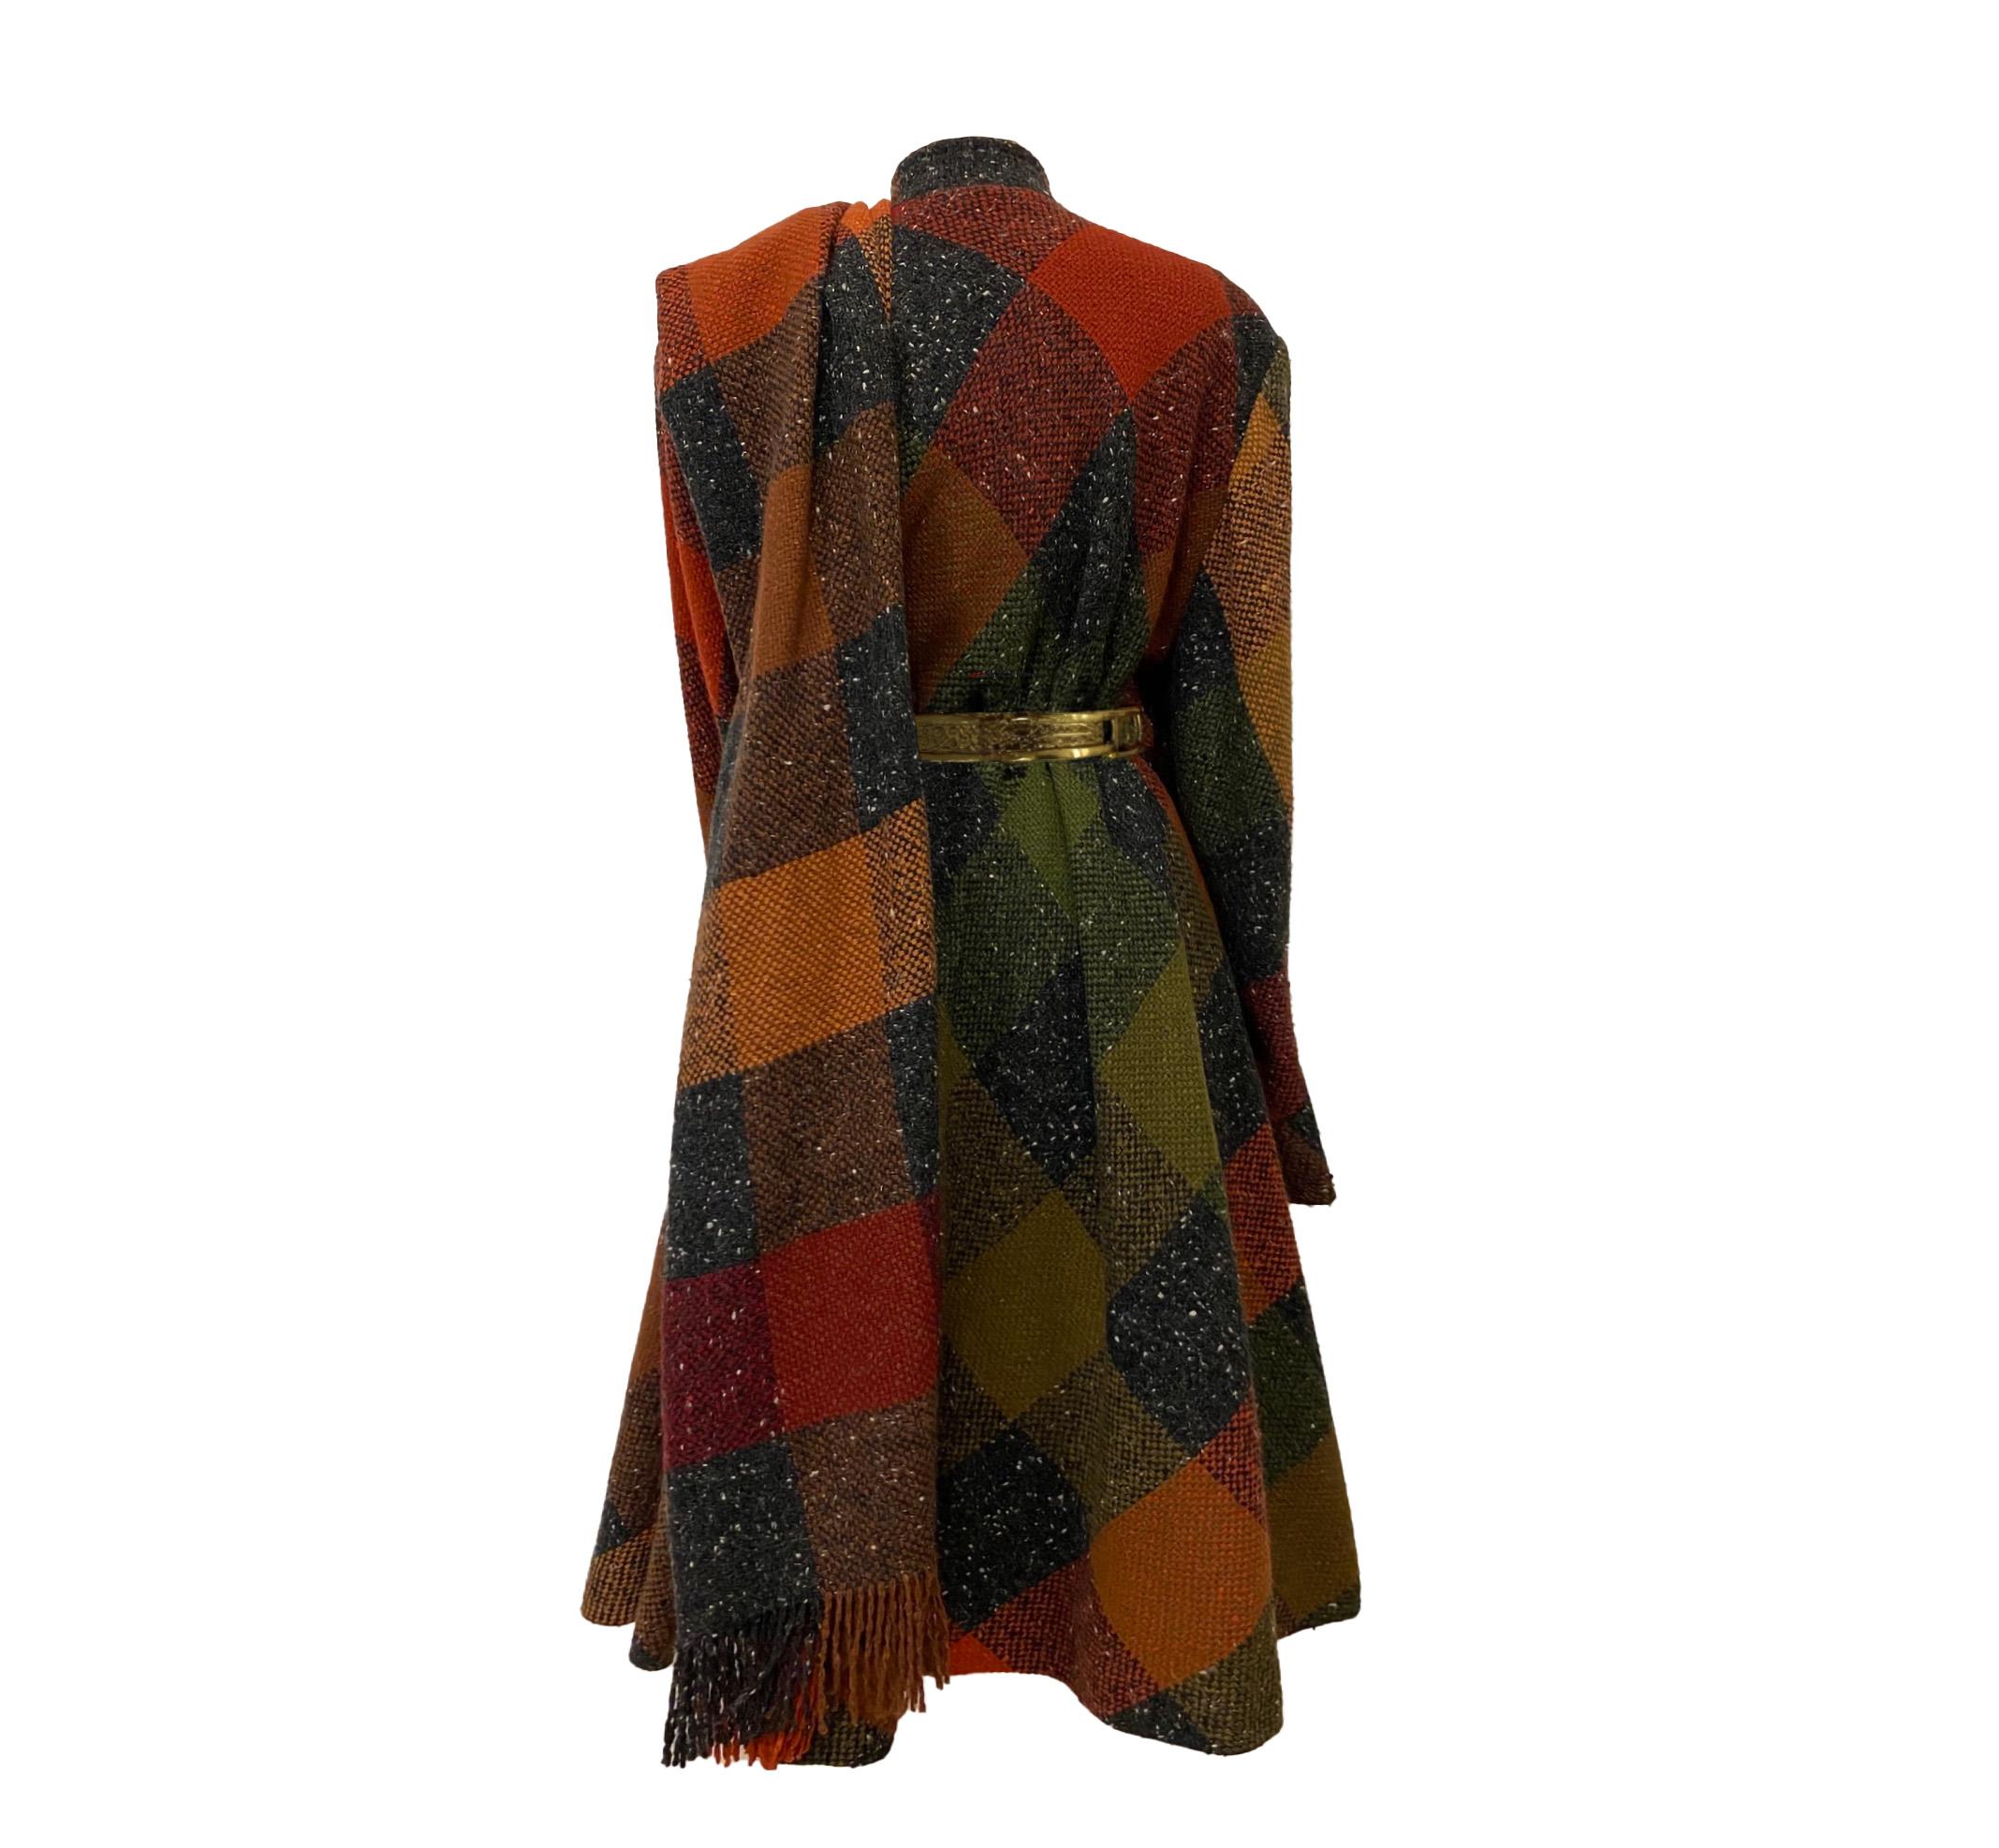 Truly one of the most beautiful coats. A rare Mila Schön, est. 80s coat with attached sash. Fabulous luxury creation of an autumn/winter coat. Amazing high quality fabric, wool tartan, and silk lining. This is something very special and